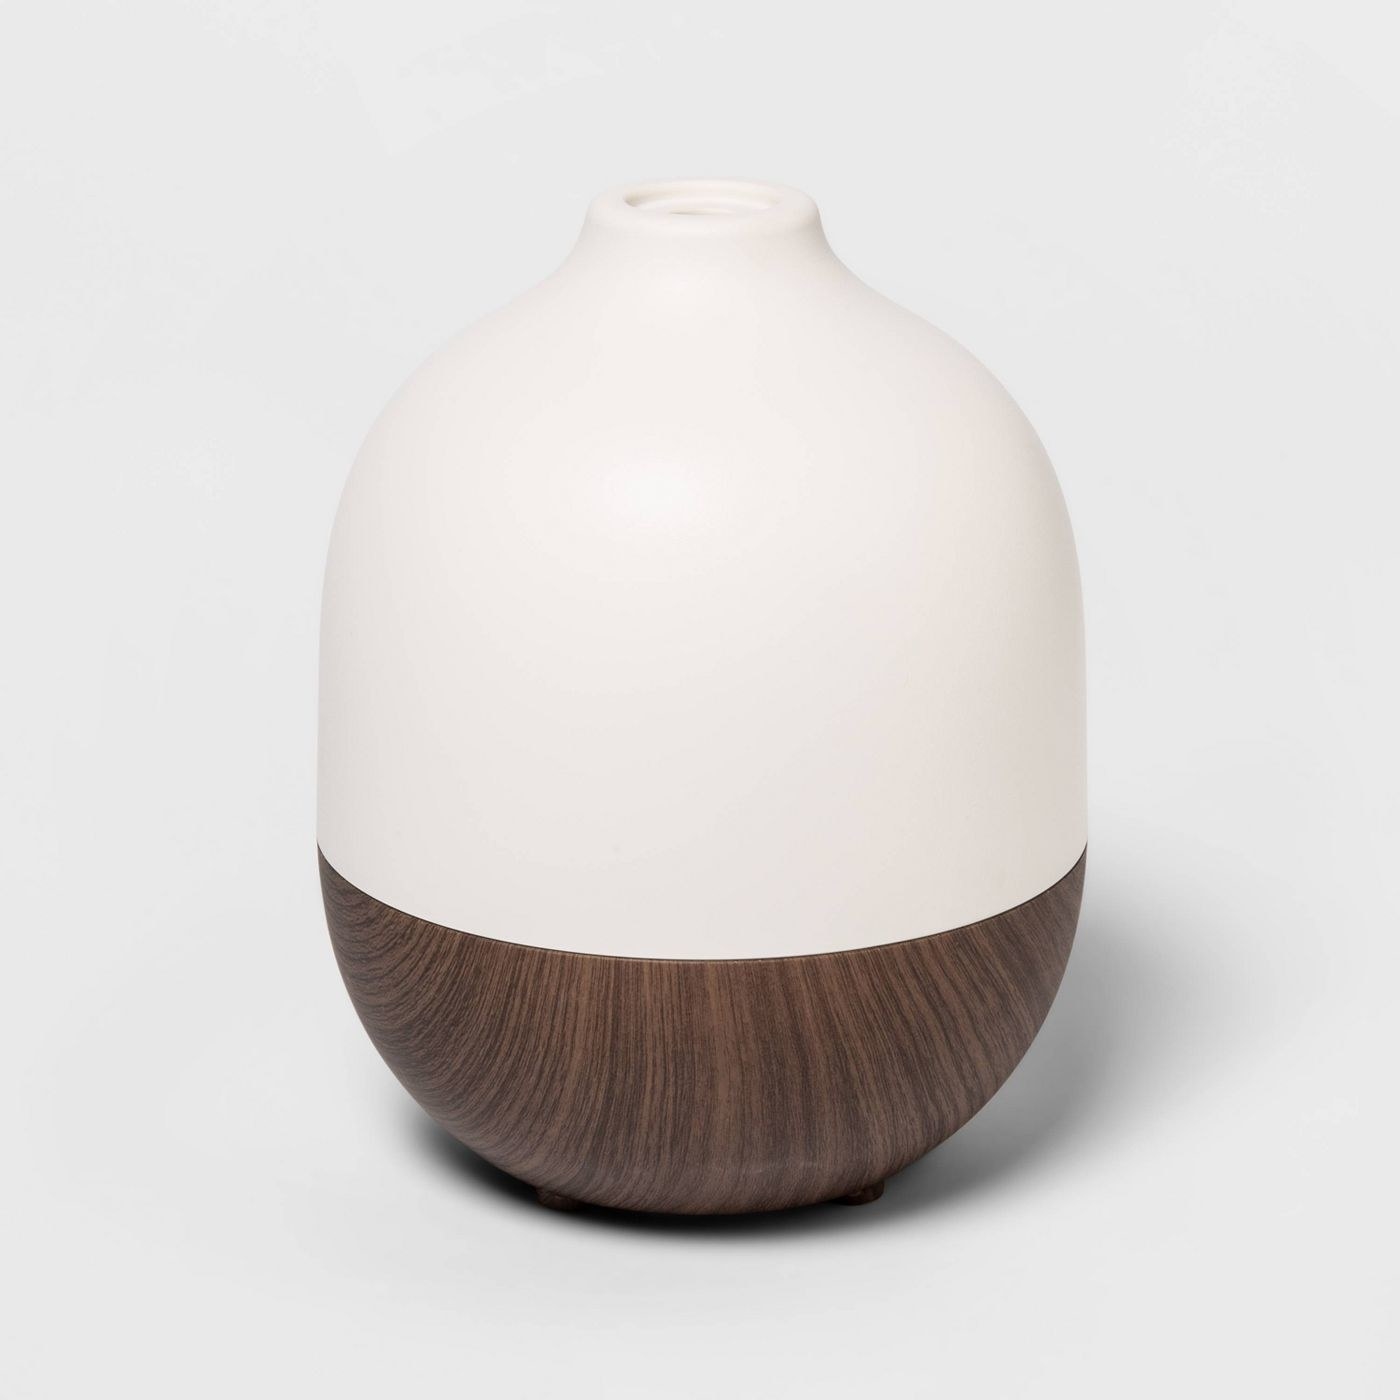 oil diffuser with a wooden bottom and white top